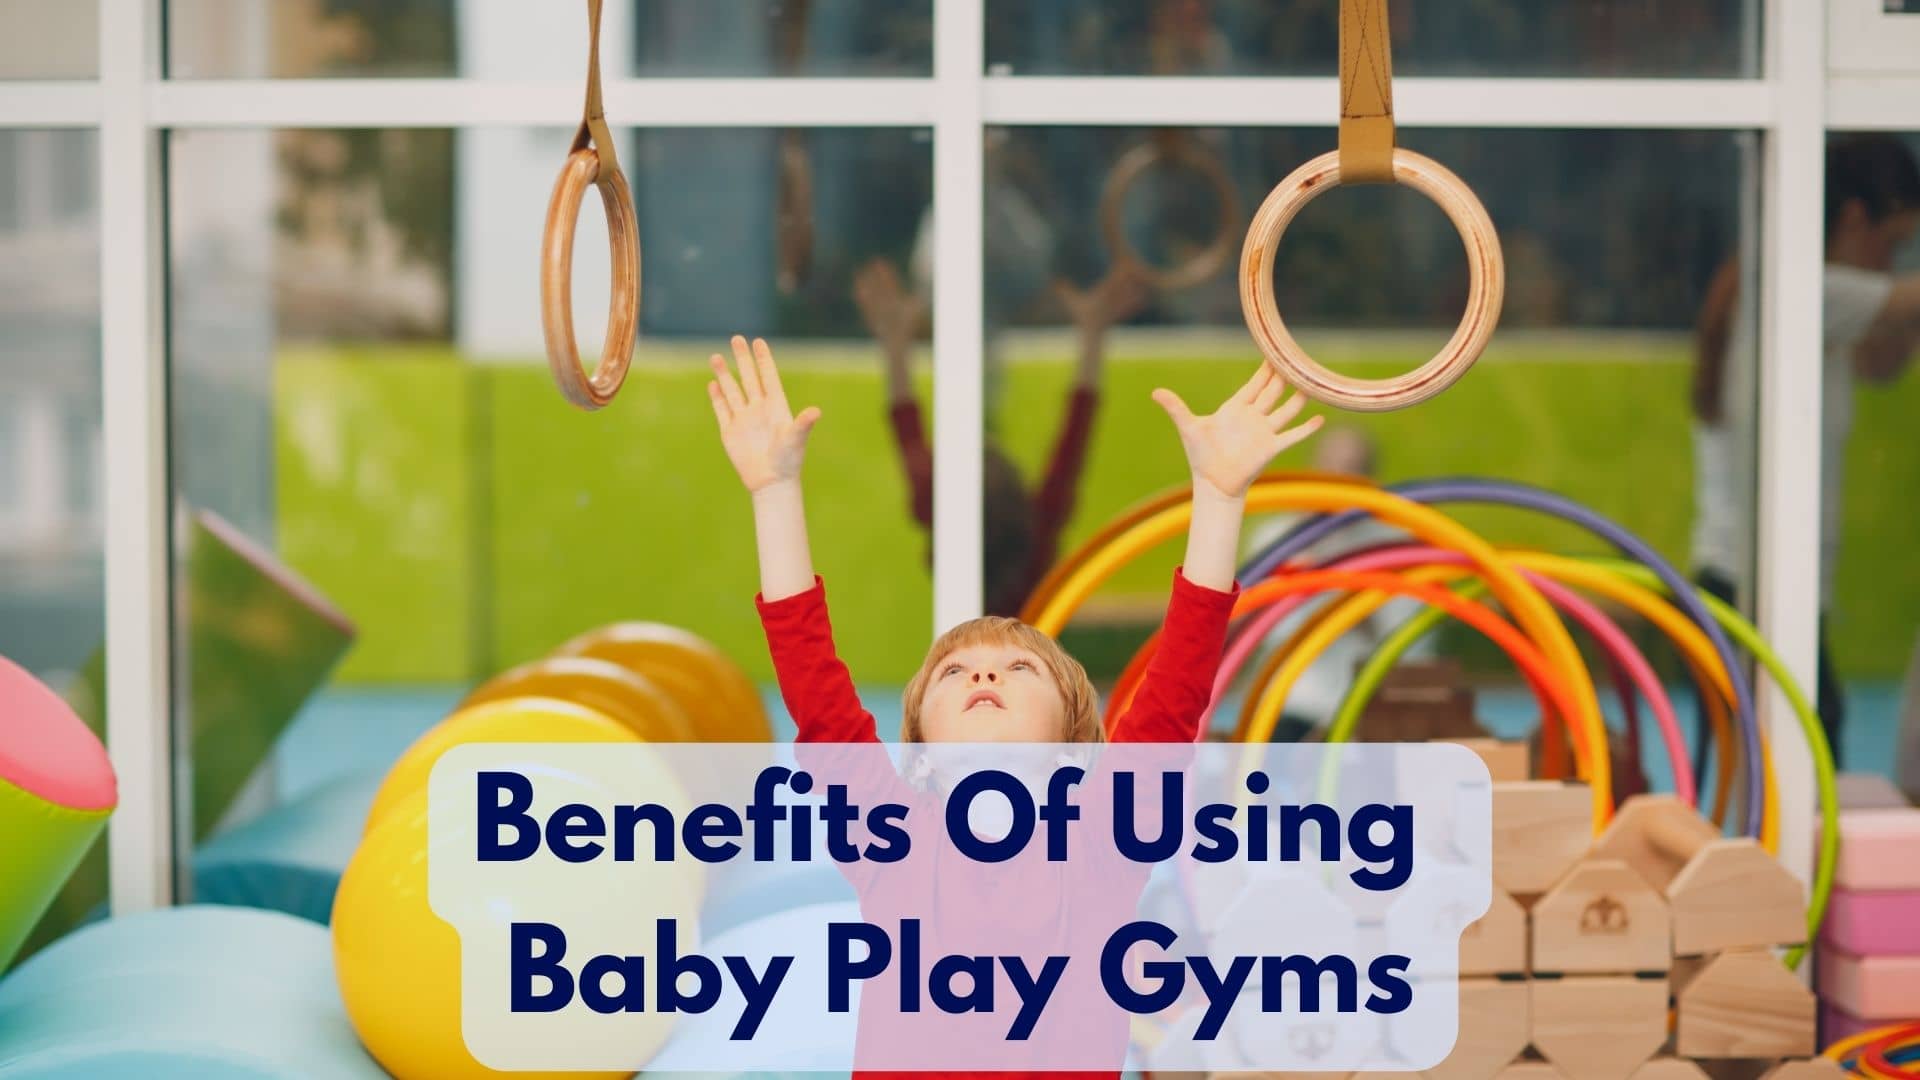 What Are The Benefits Of Using Baby Play Gyms?